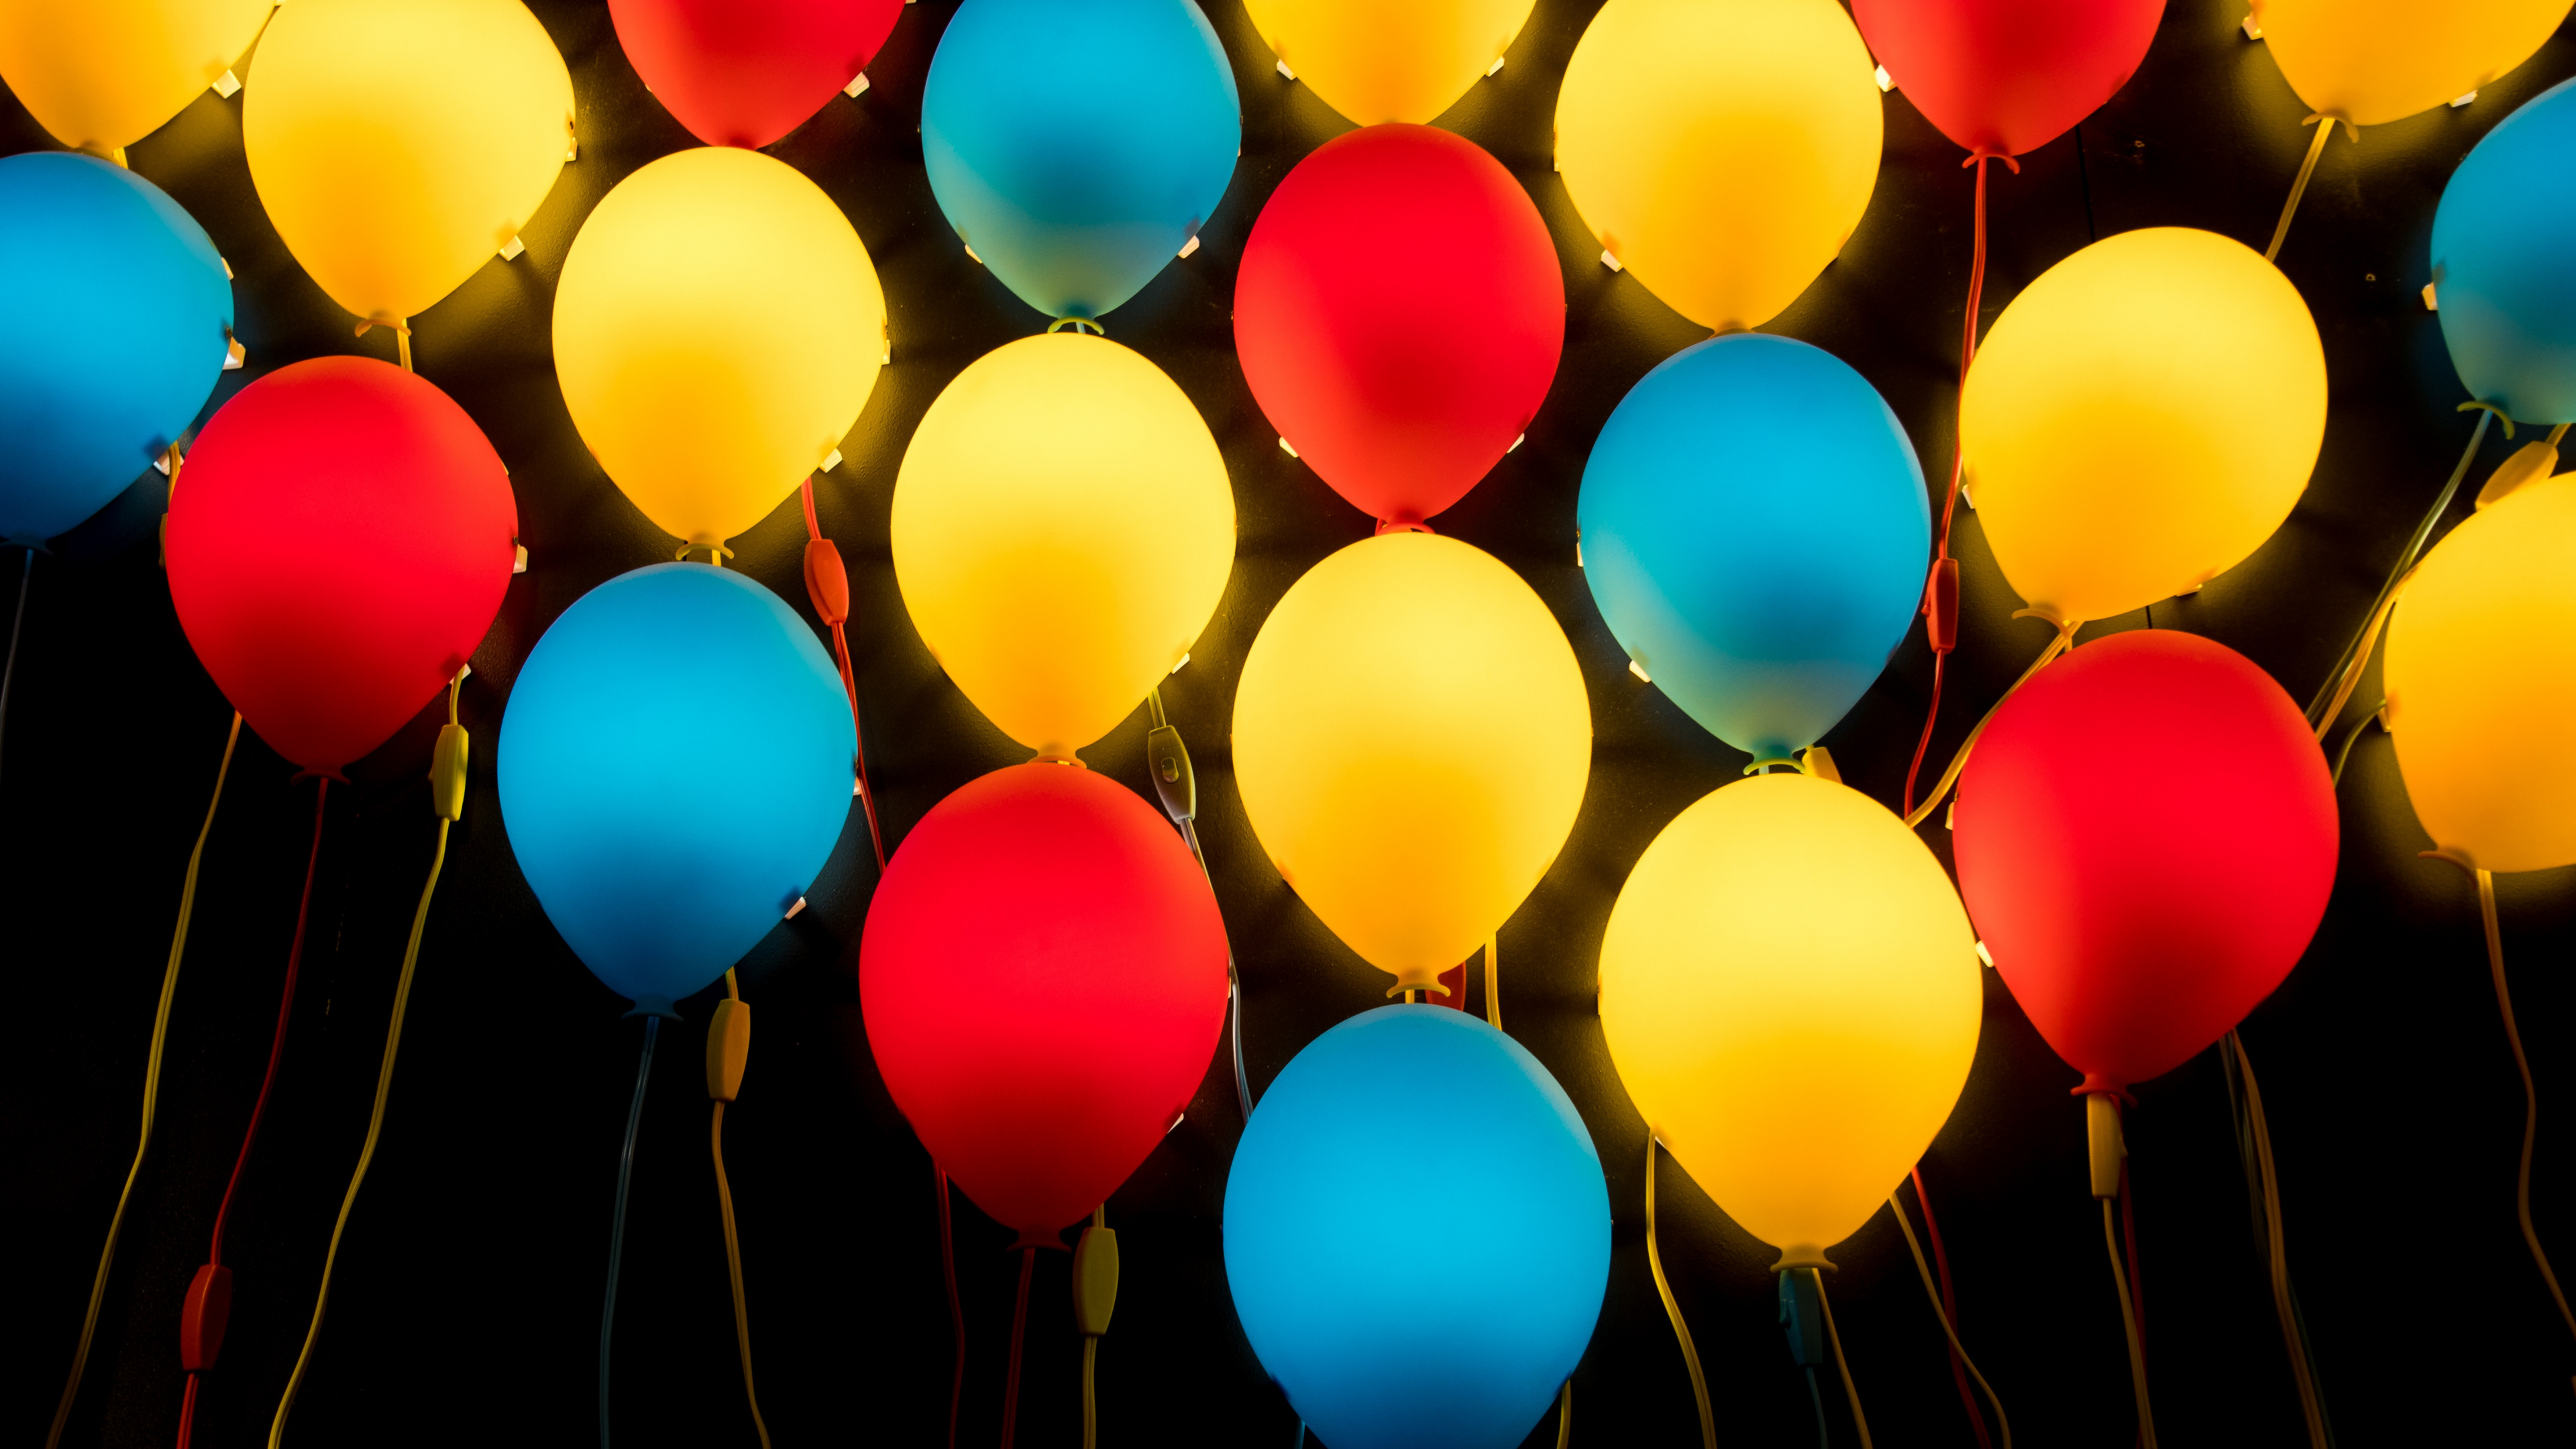 Yellow Blue and Red Balloons. Wallpaper in 3840x2160 Resolution